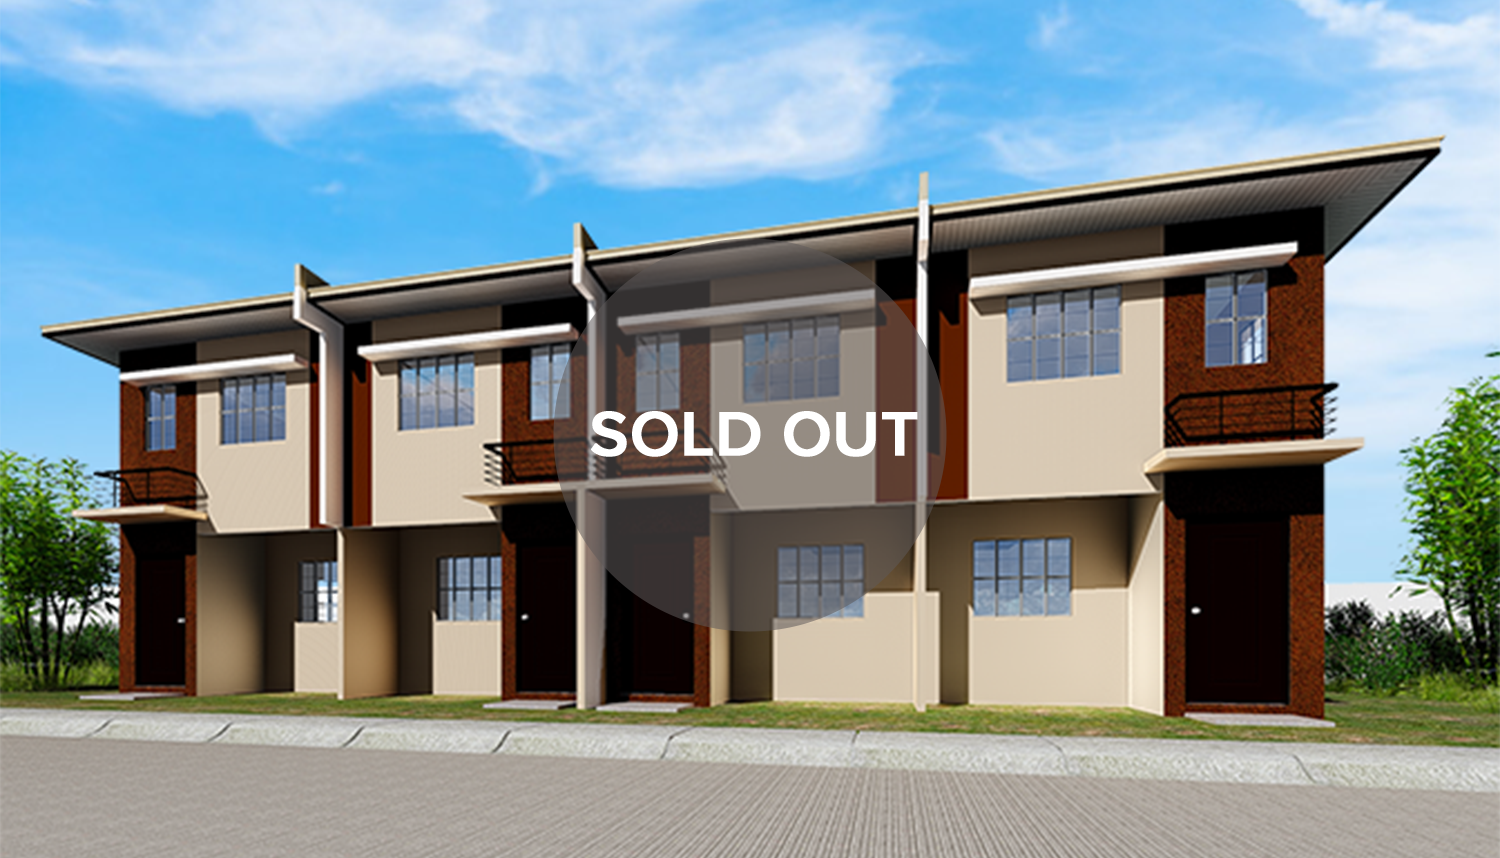 angeli townhouse image 1 sold out | Affordable House and Lot For Sale In The Philippines